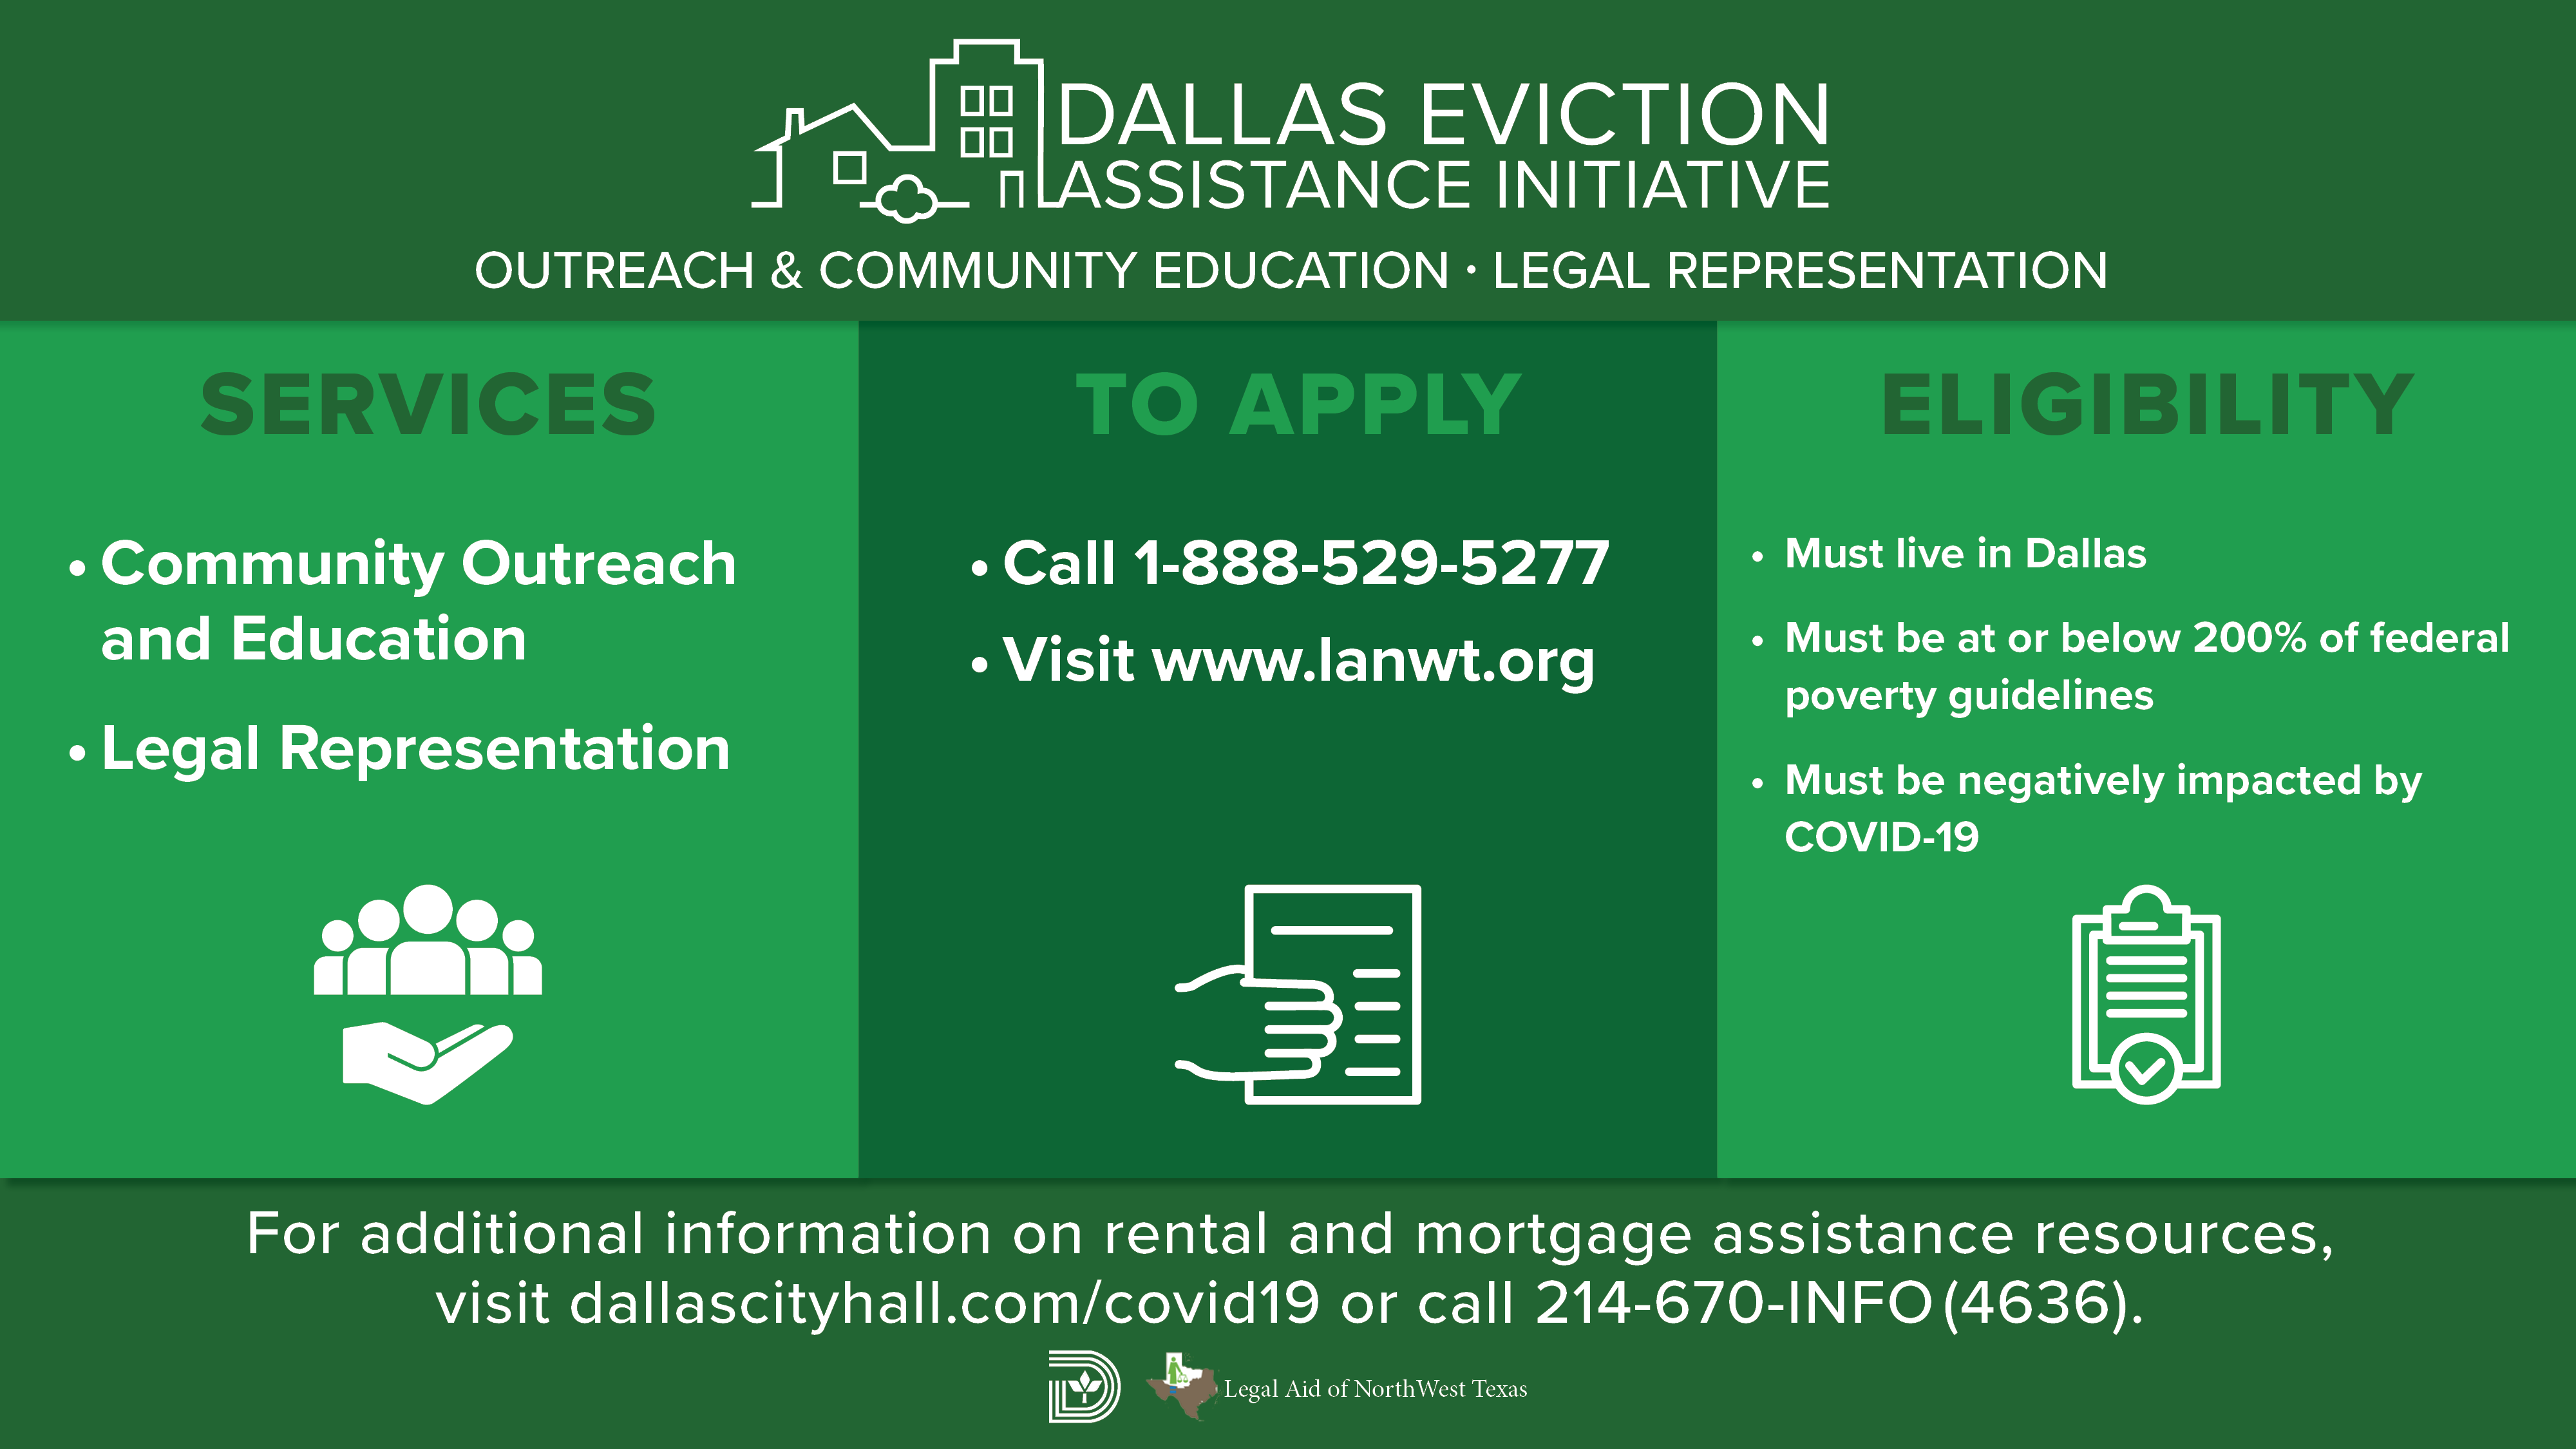 EvictionAssistanceInitiative_Social_English_Final.png